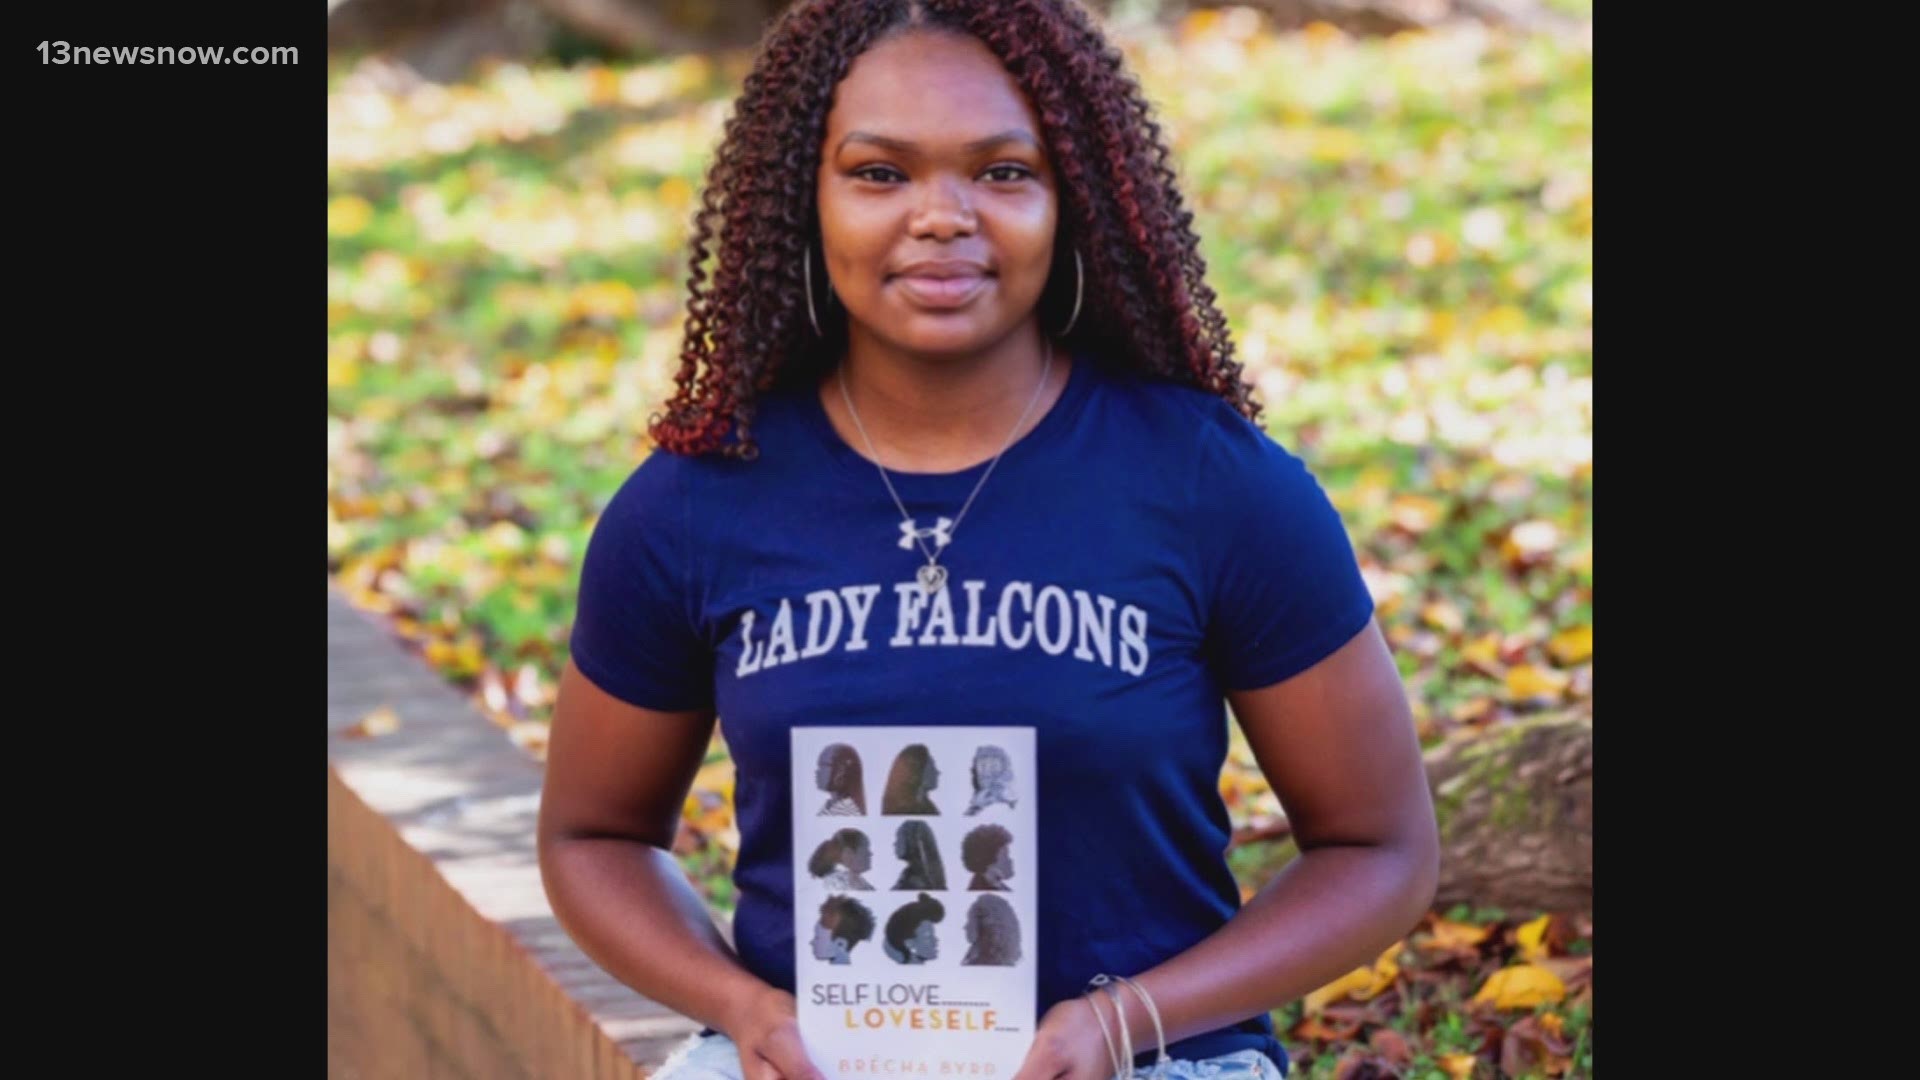 A former basketball sensation at Surry County High, Byrd is now an author, motivational speaker and college student.